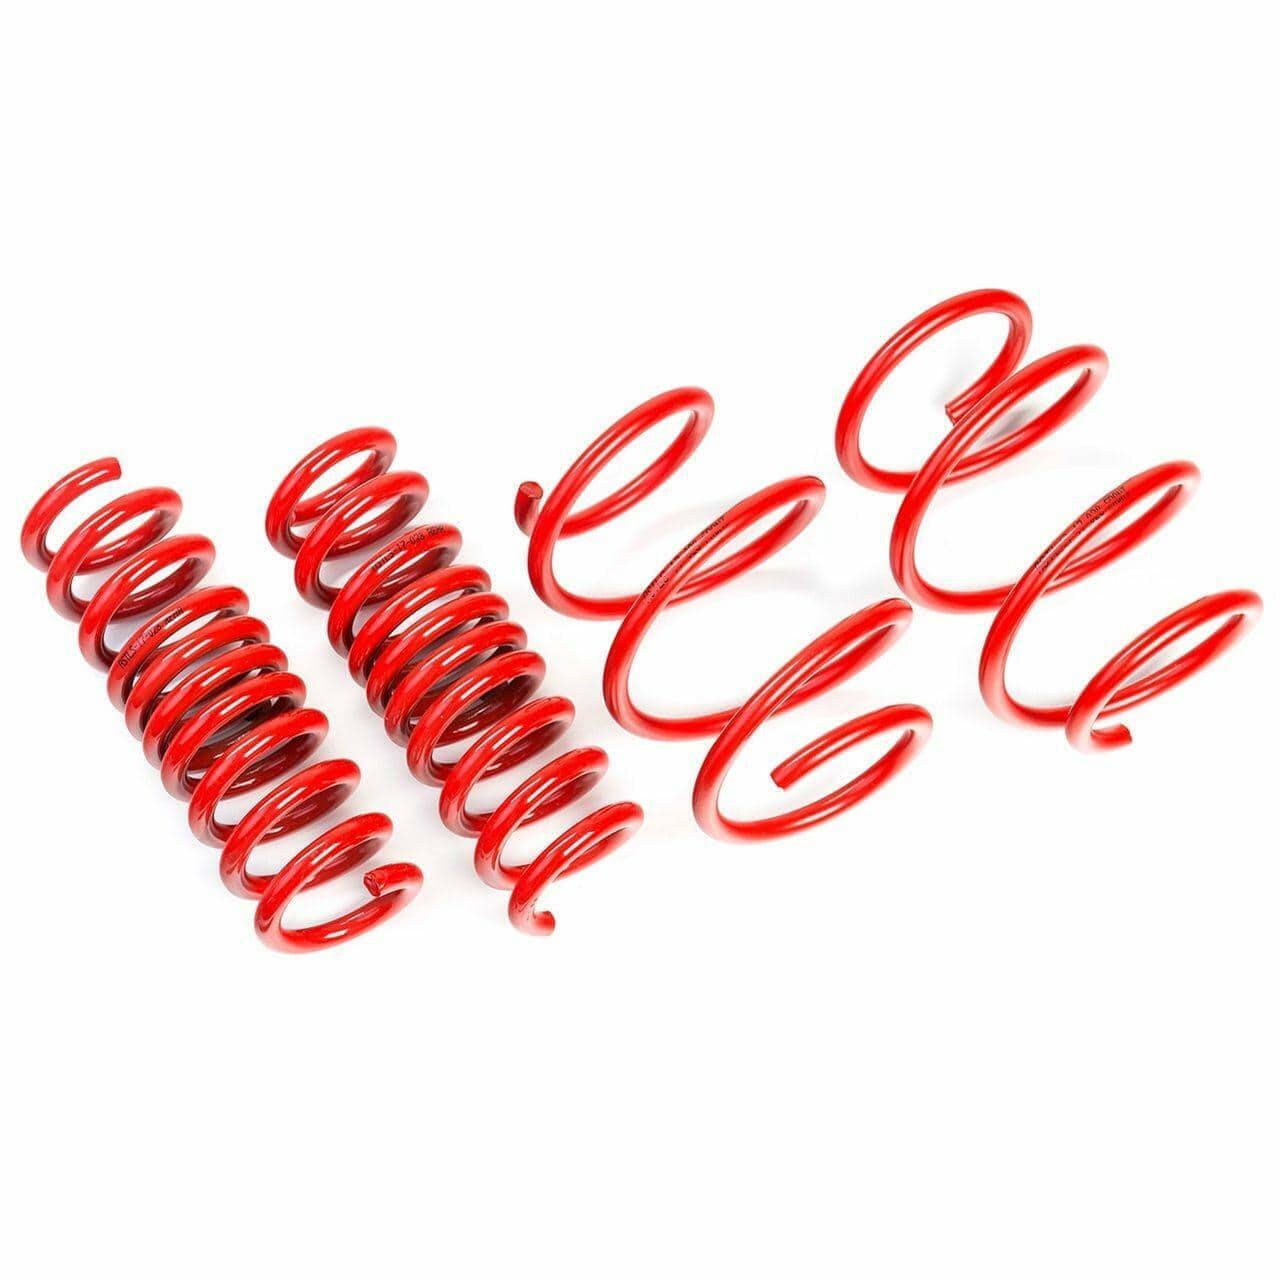 AST Suspension Lowering Springs (30MM/30MM) - 1991-1994 Mercedes-Benz S-Class 300SE/300SD/S280/S320 (W140) ASTLS-14-1199